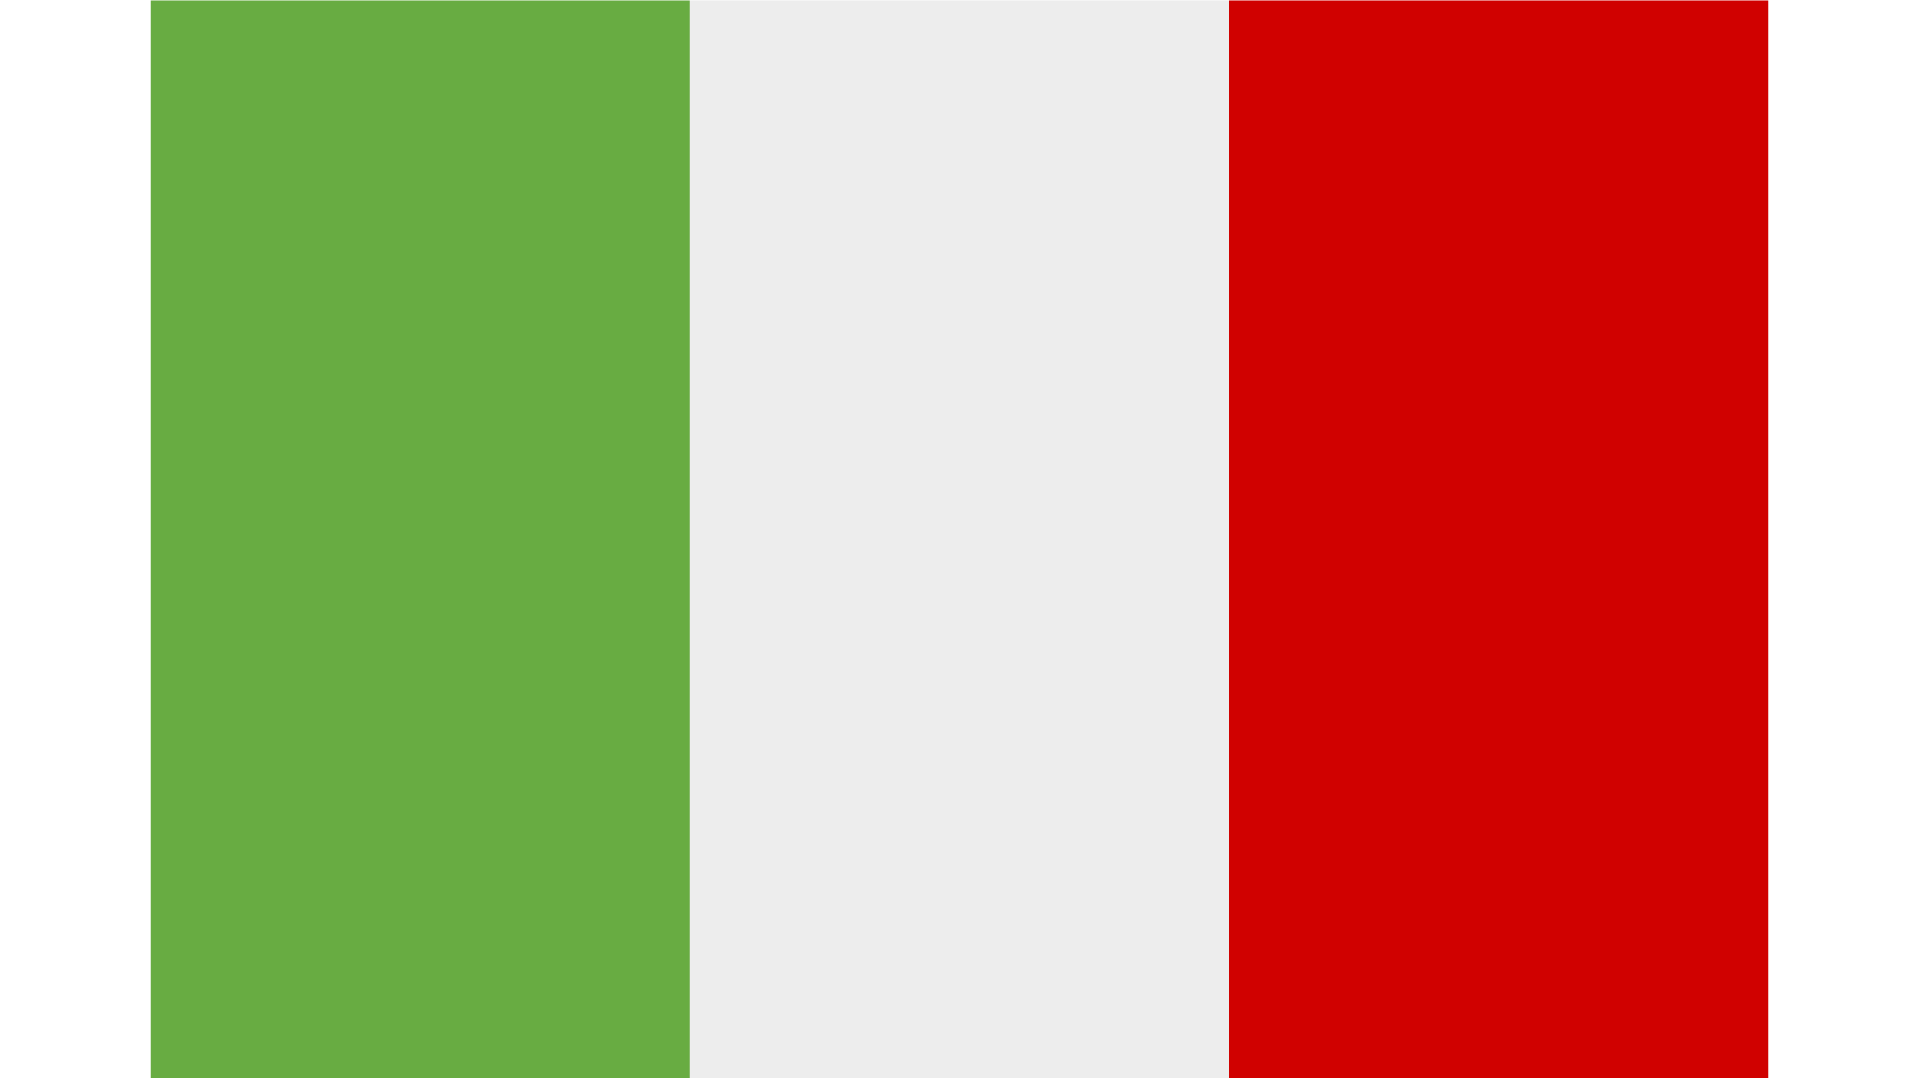 The flag of Italy with vertical stripes in green, white and red.